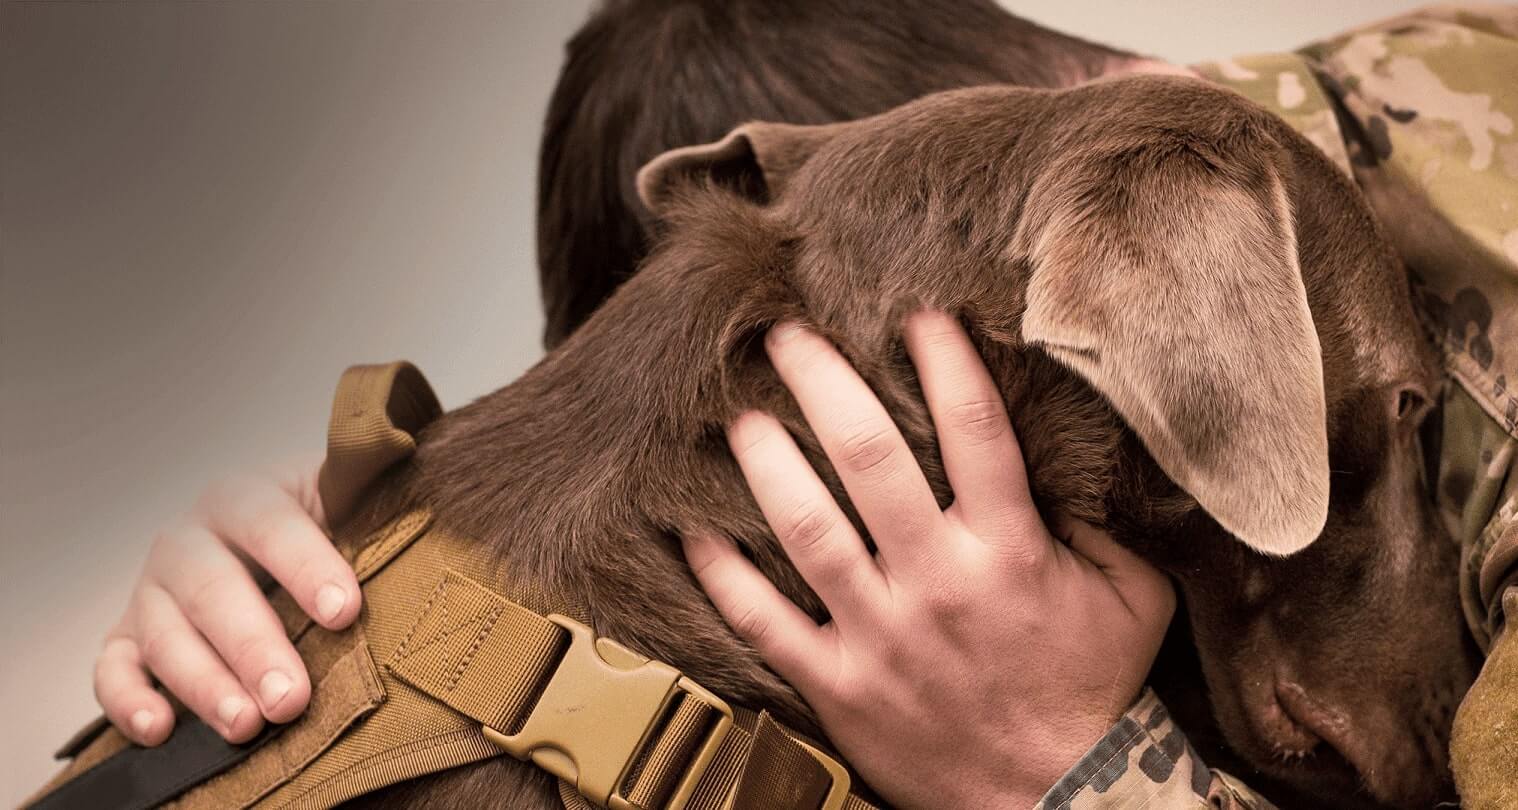 Register your Service Animal in 3 Easy Steps